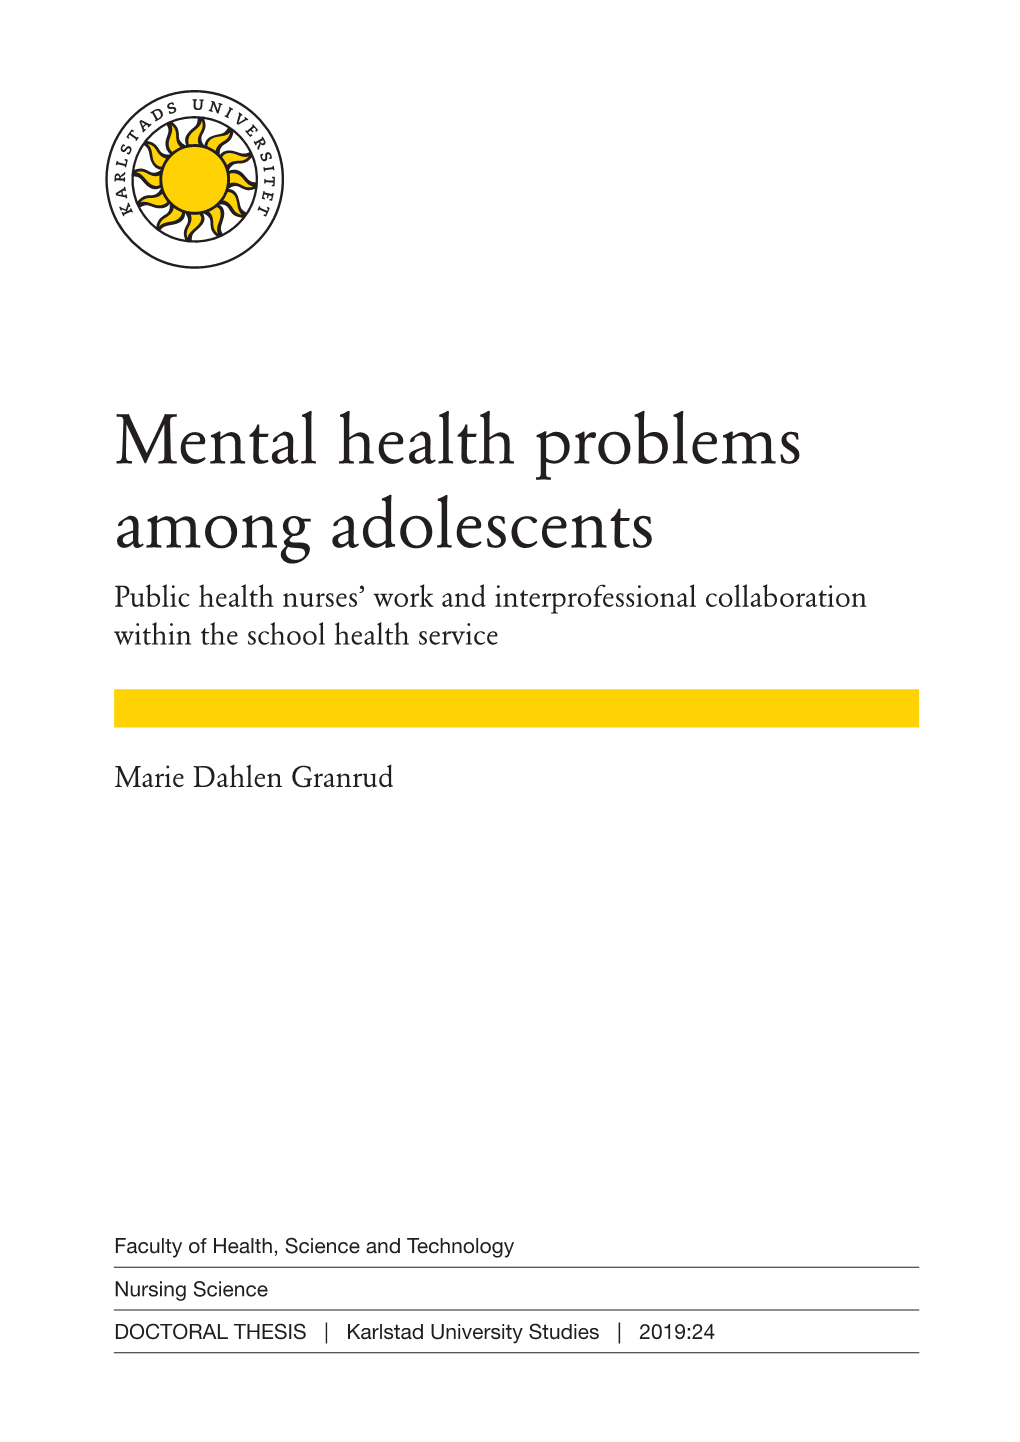 Mental Health Problems Among Adolescents